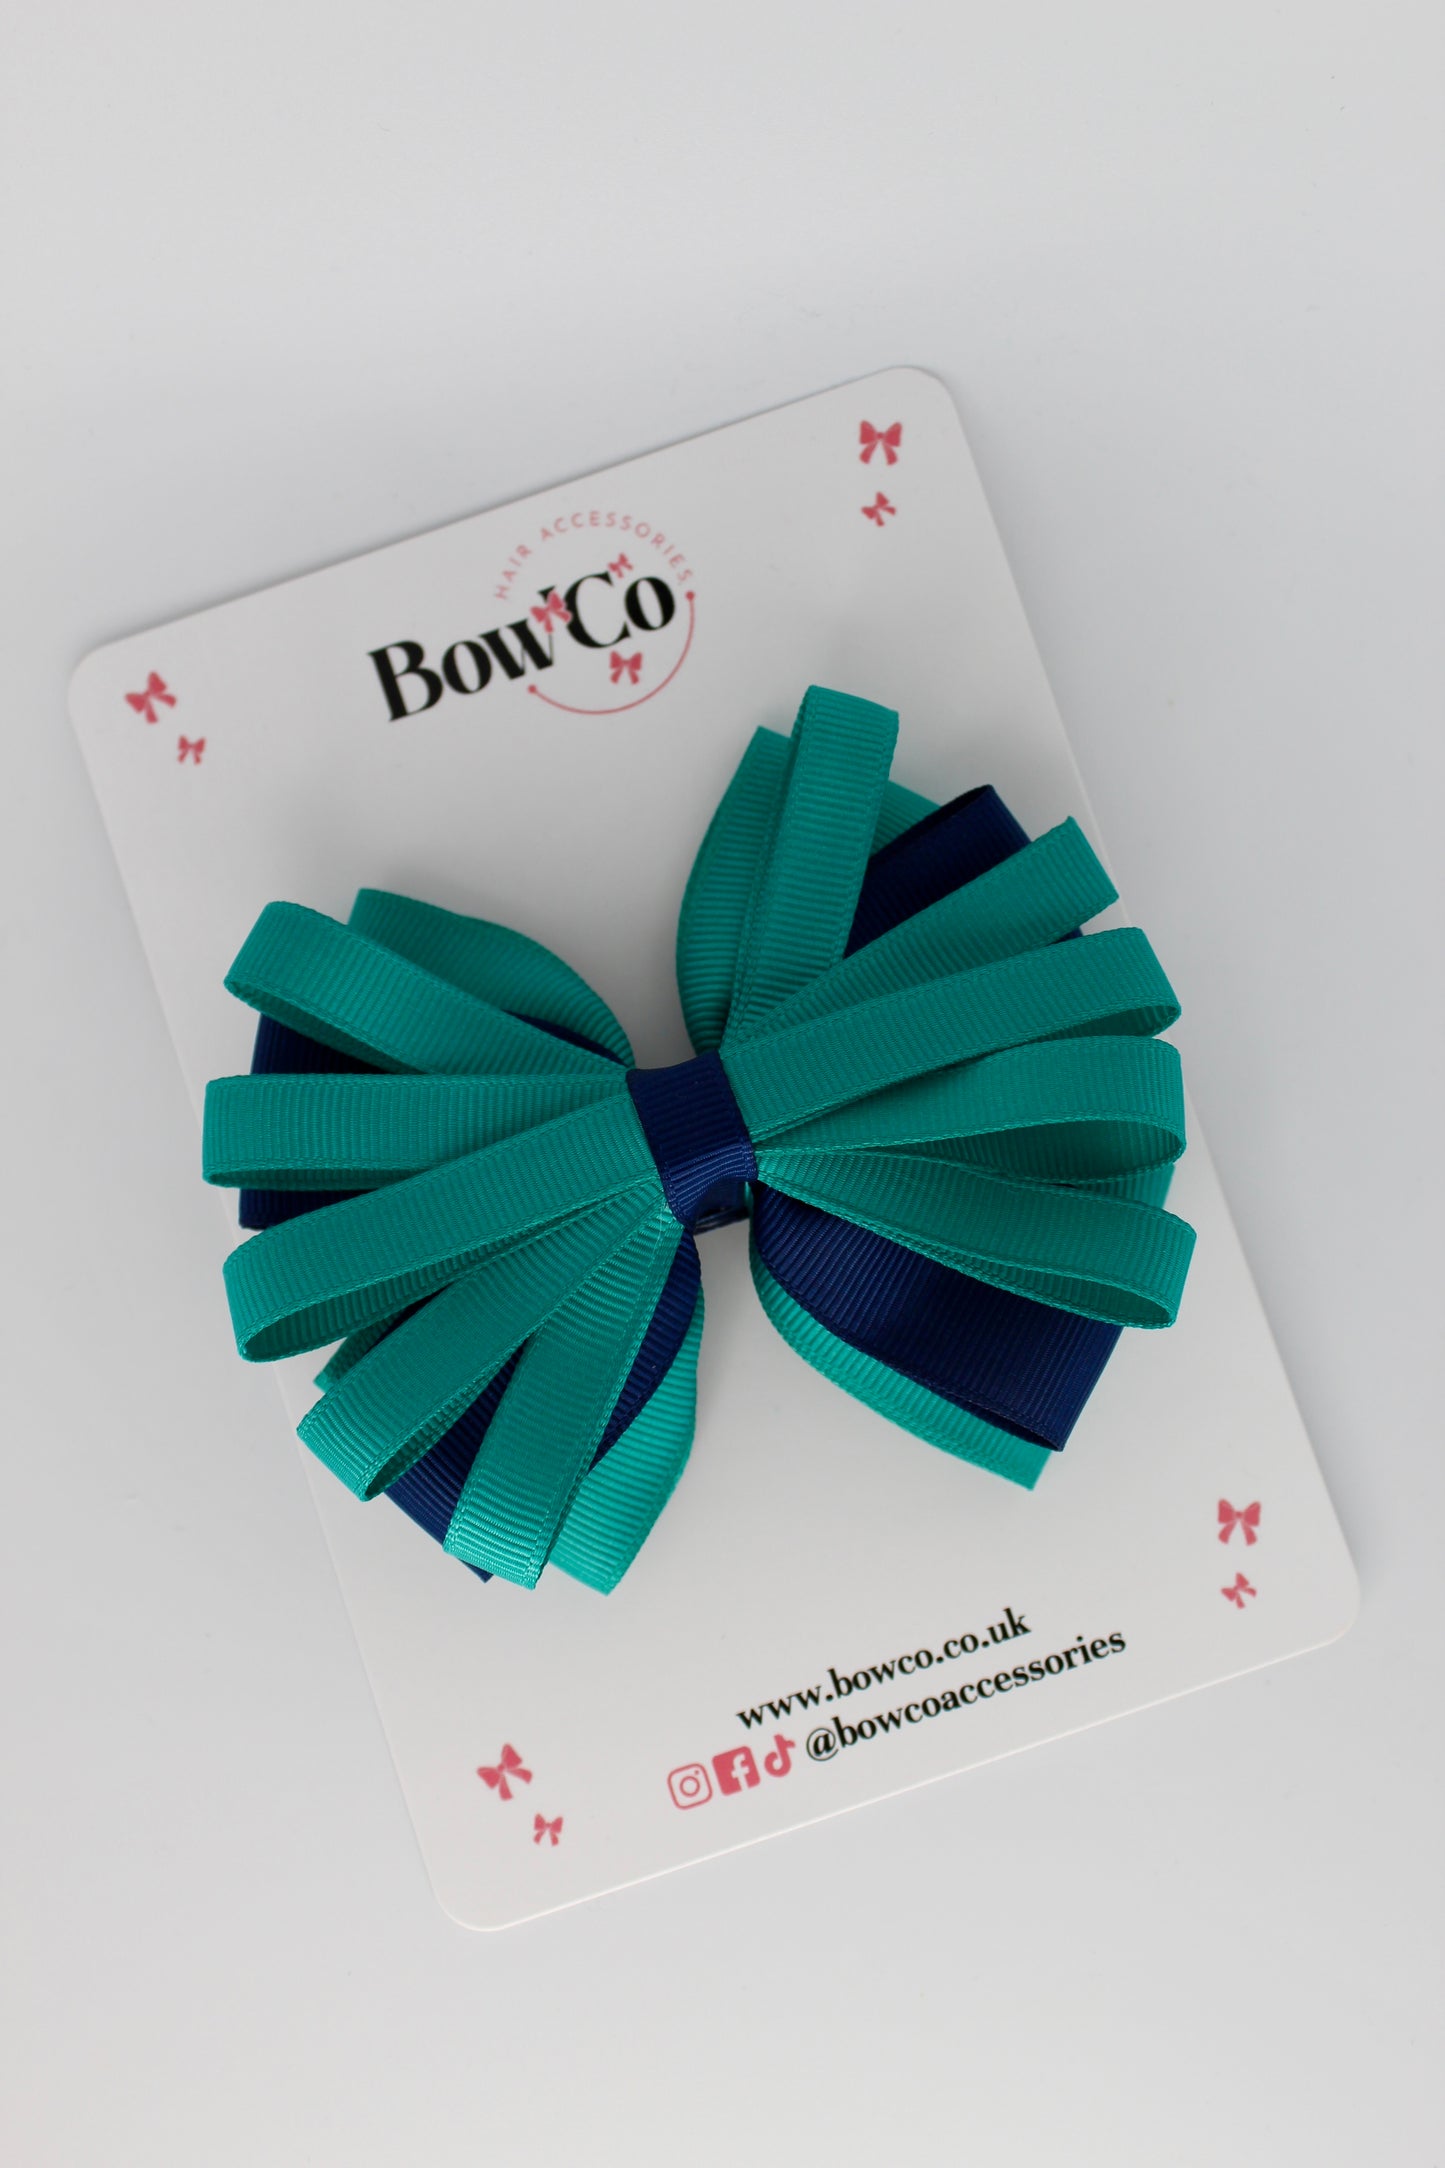 4 Inch Spiral Bow - 4 Inches - Clip - Jade Green and Navy